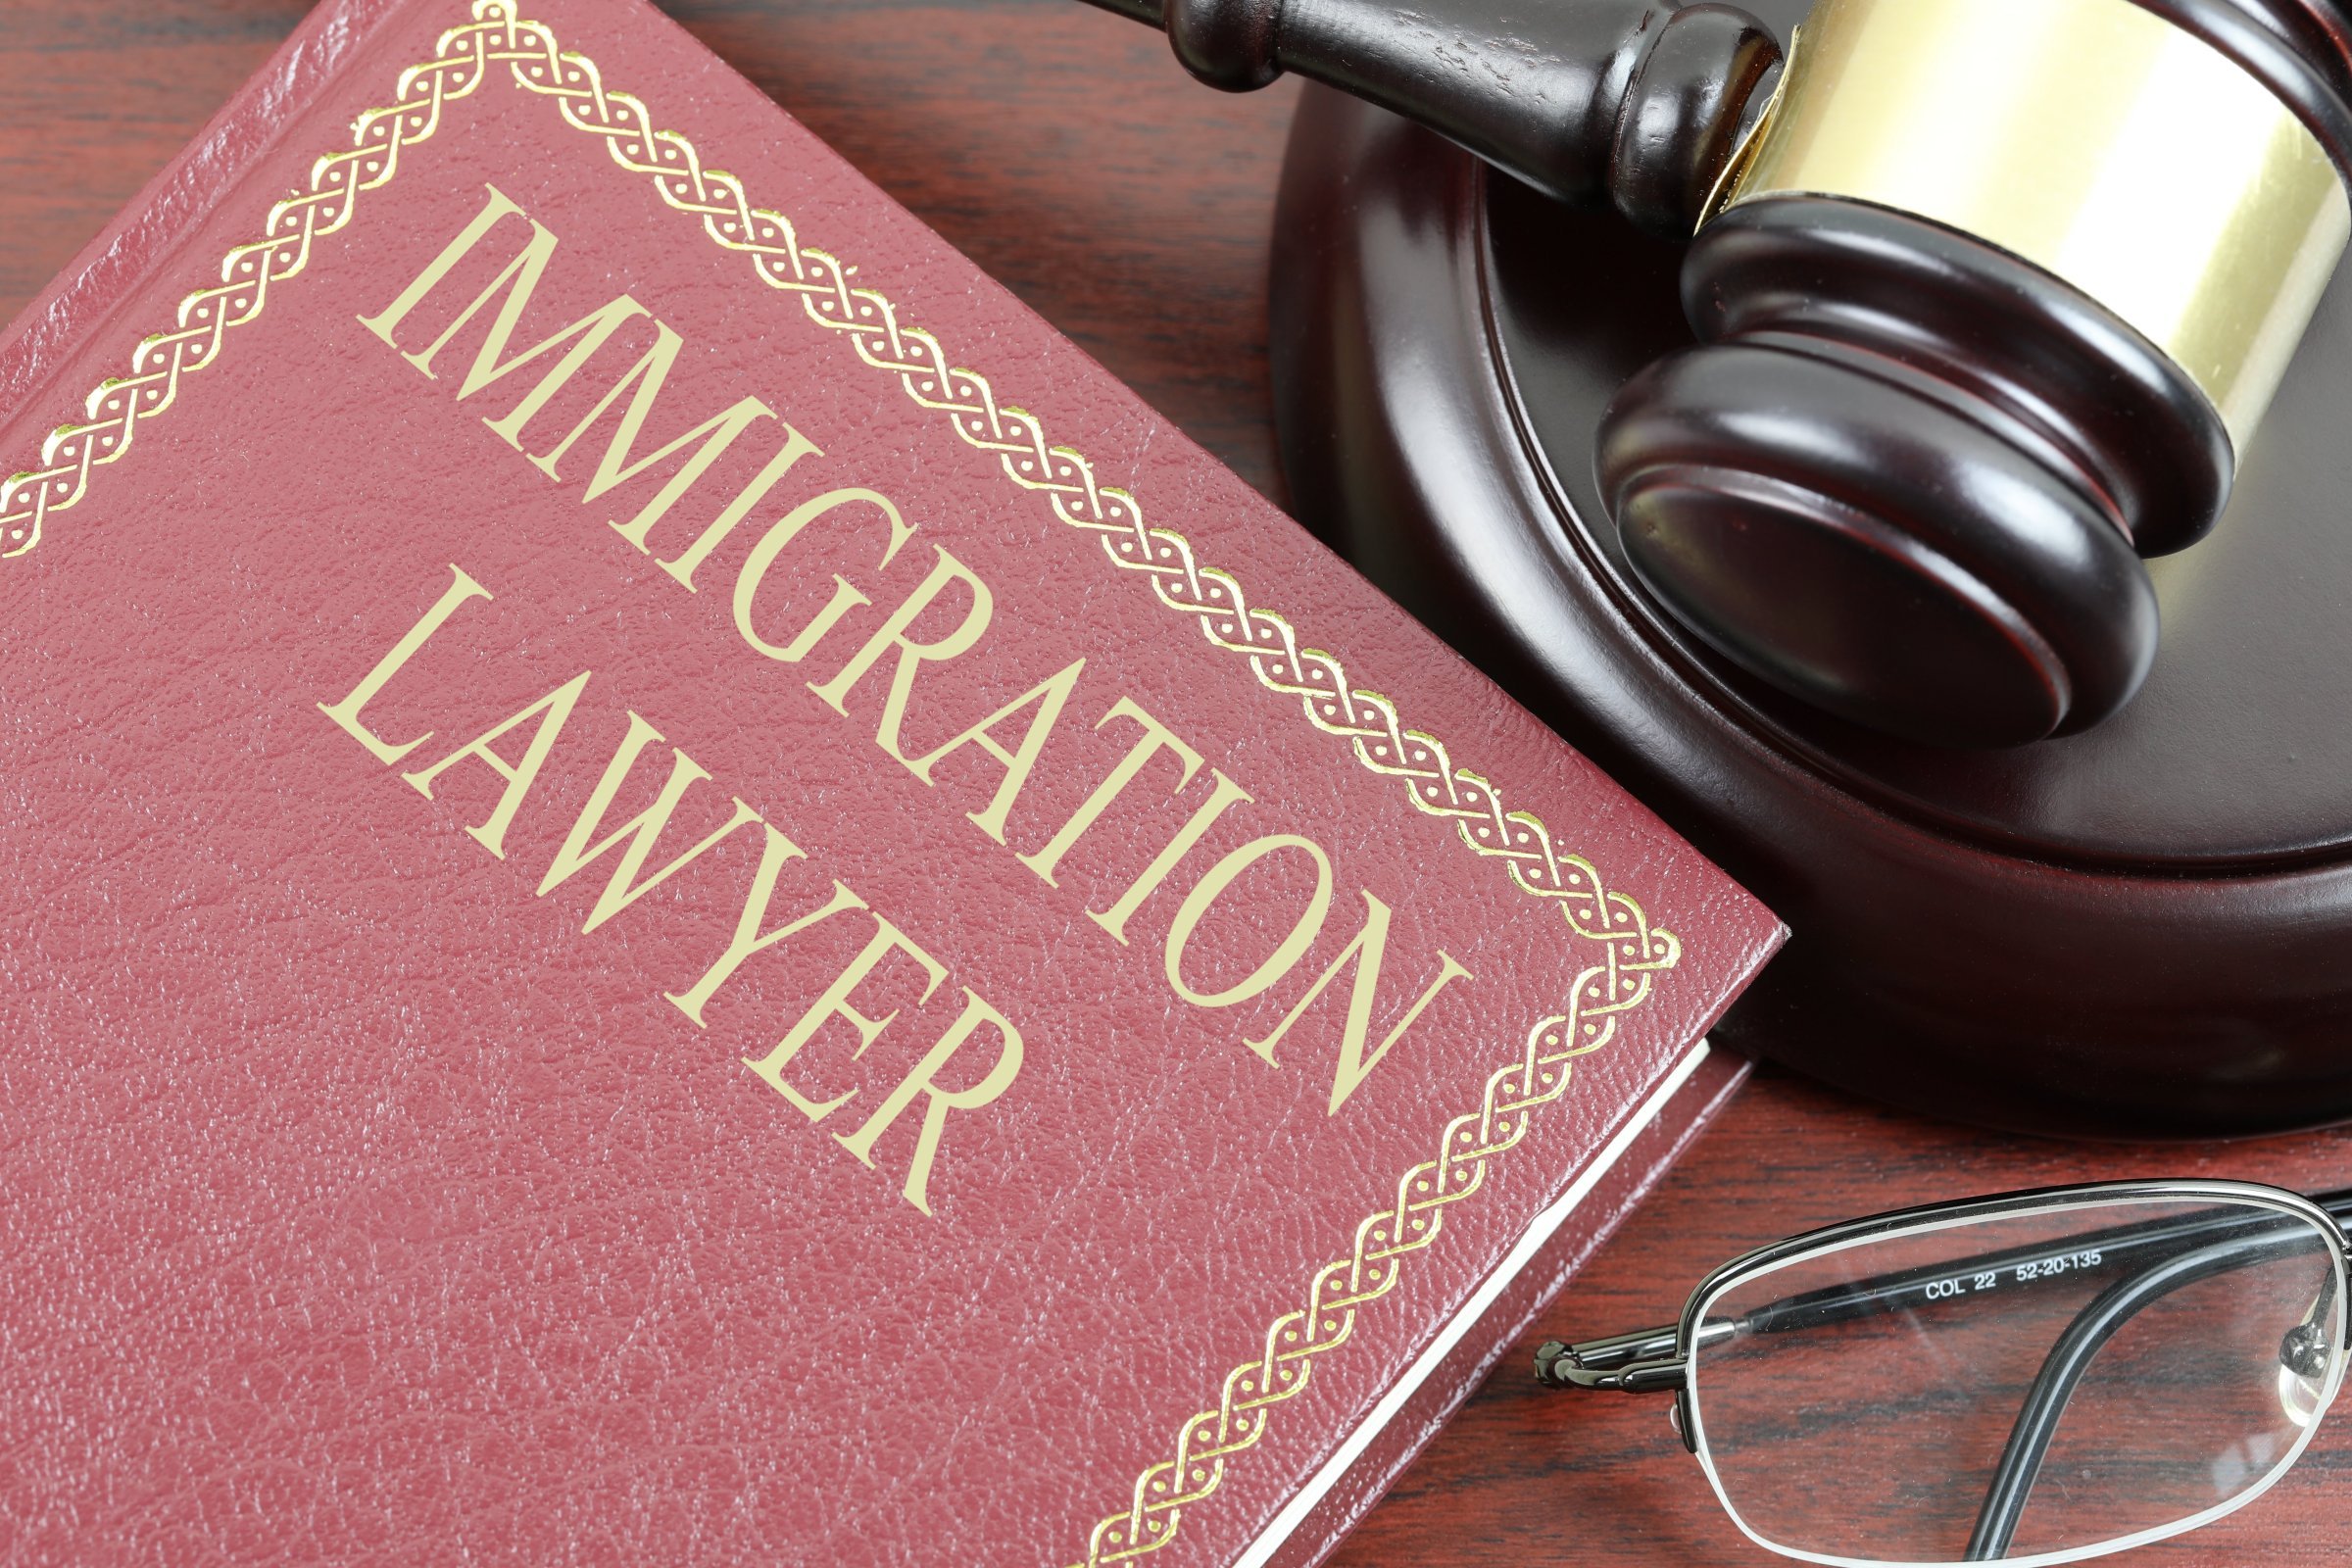 Immigration Lawyer - Free of Charge Creative Commons Law book image